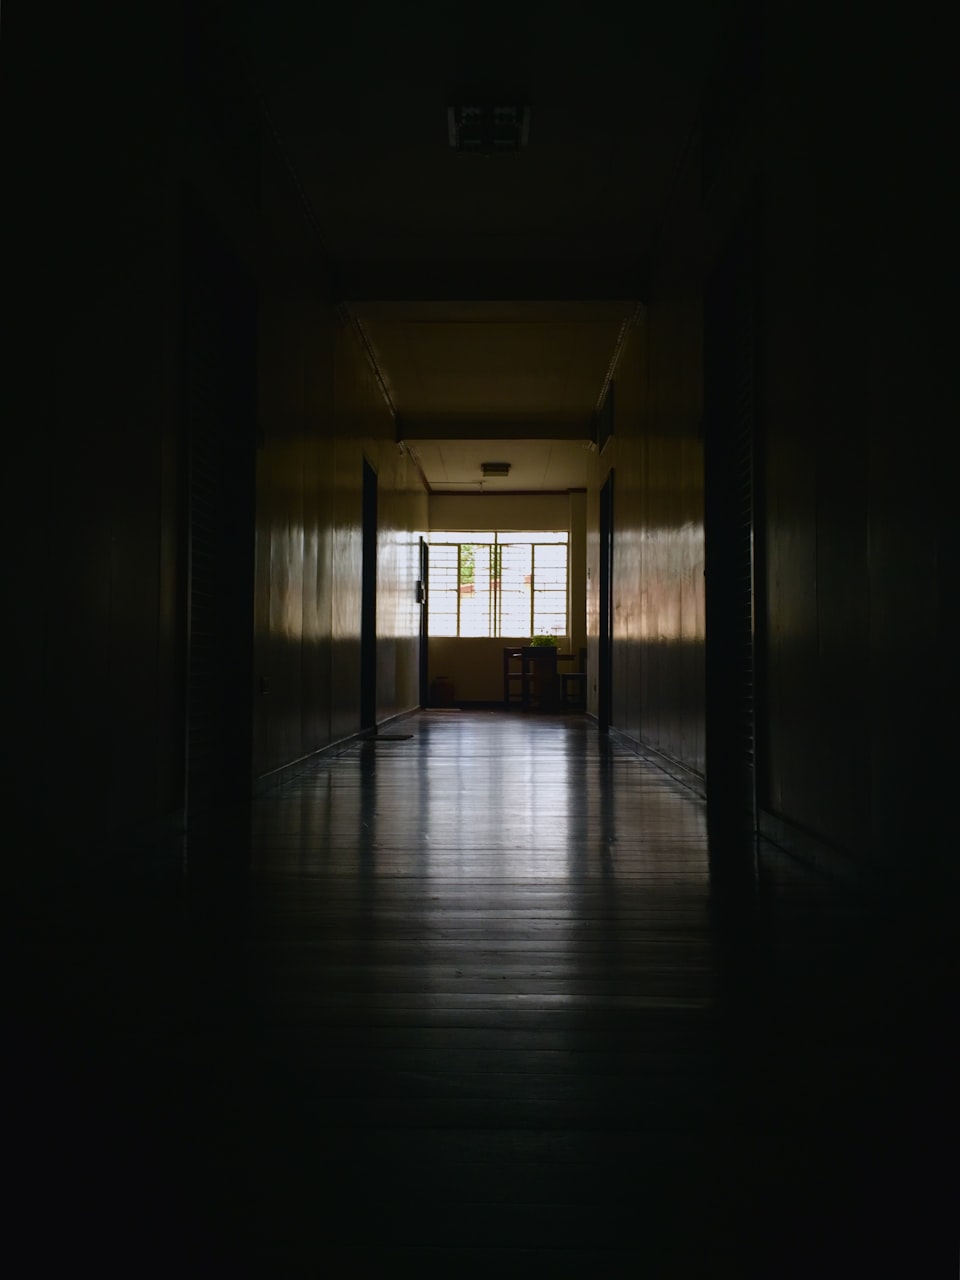 Echoes Down the Hallway